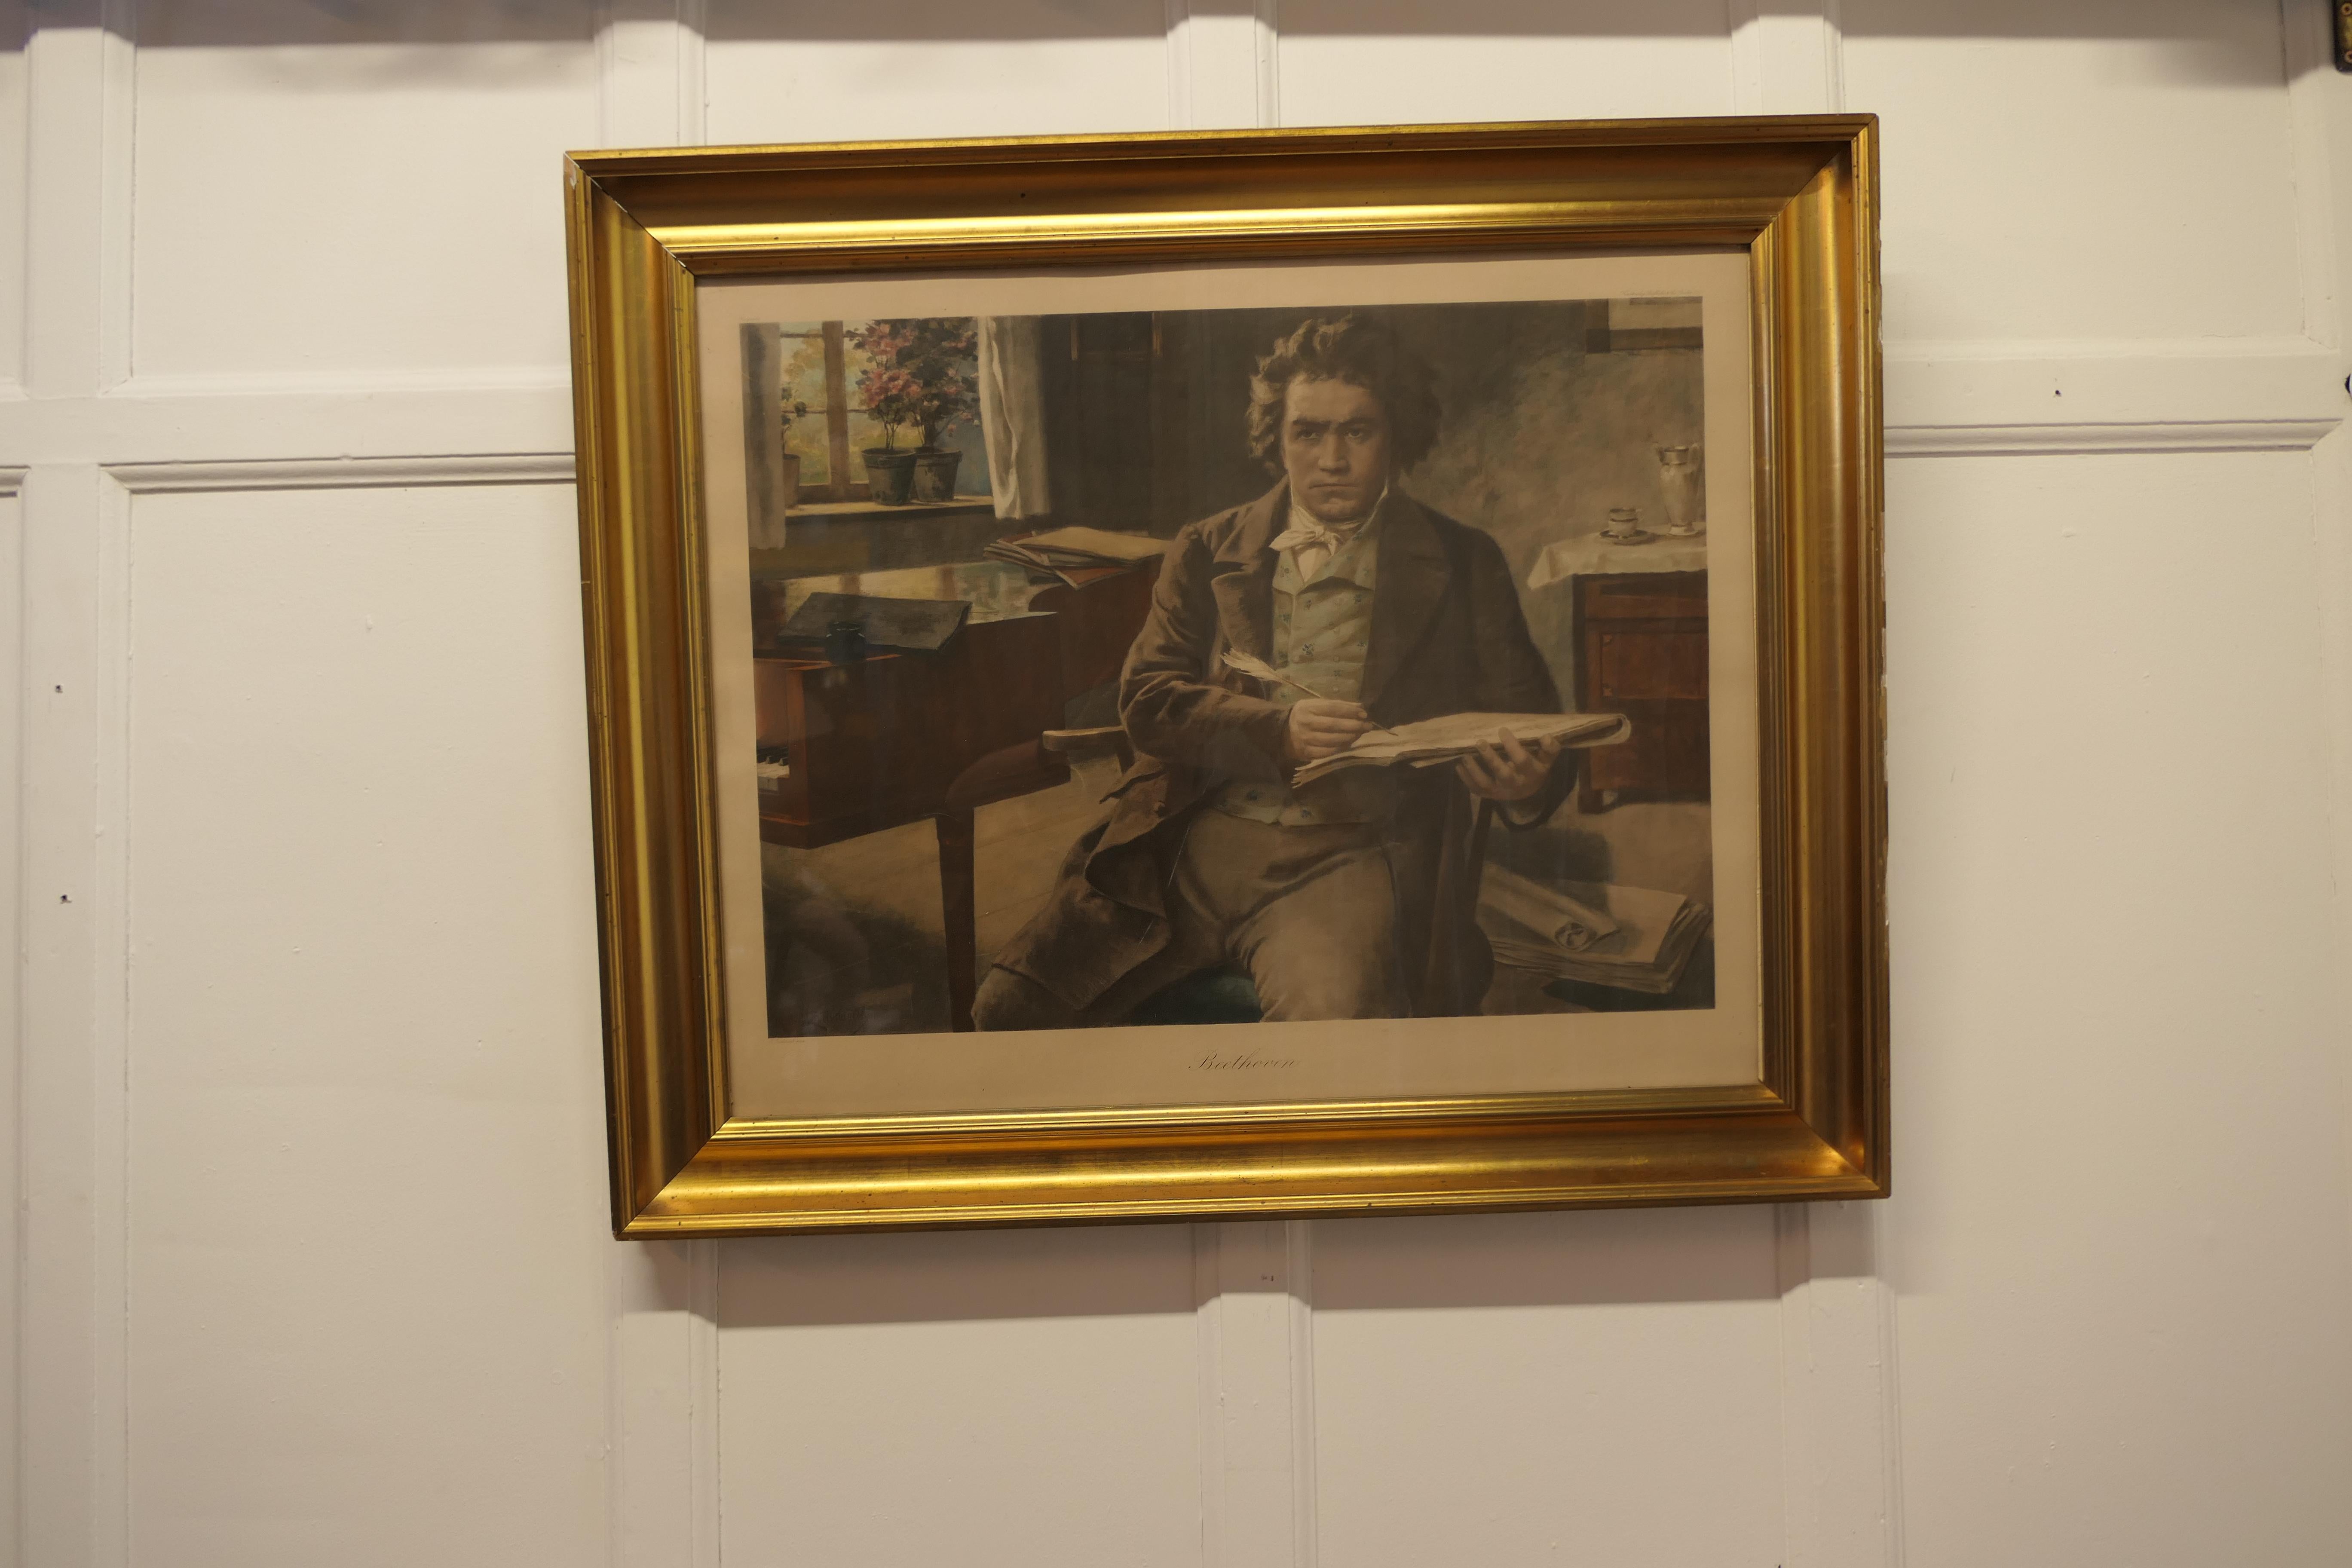  19th Century Framed Print of Beethoven   A portrait of Beethoven   In Good Condition For Sale In Chillerton, Isle of Wight